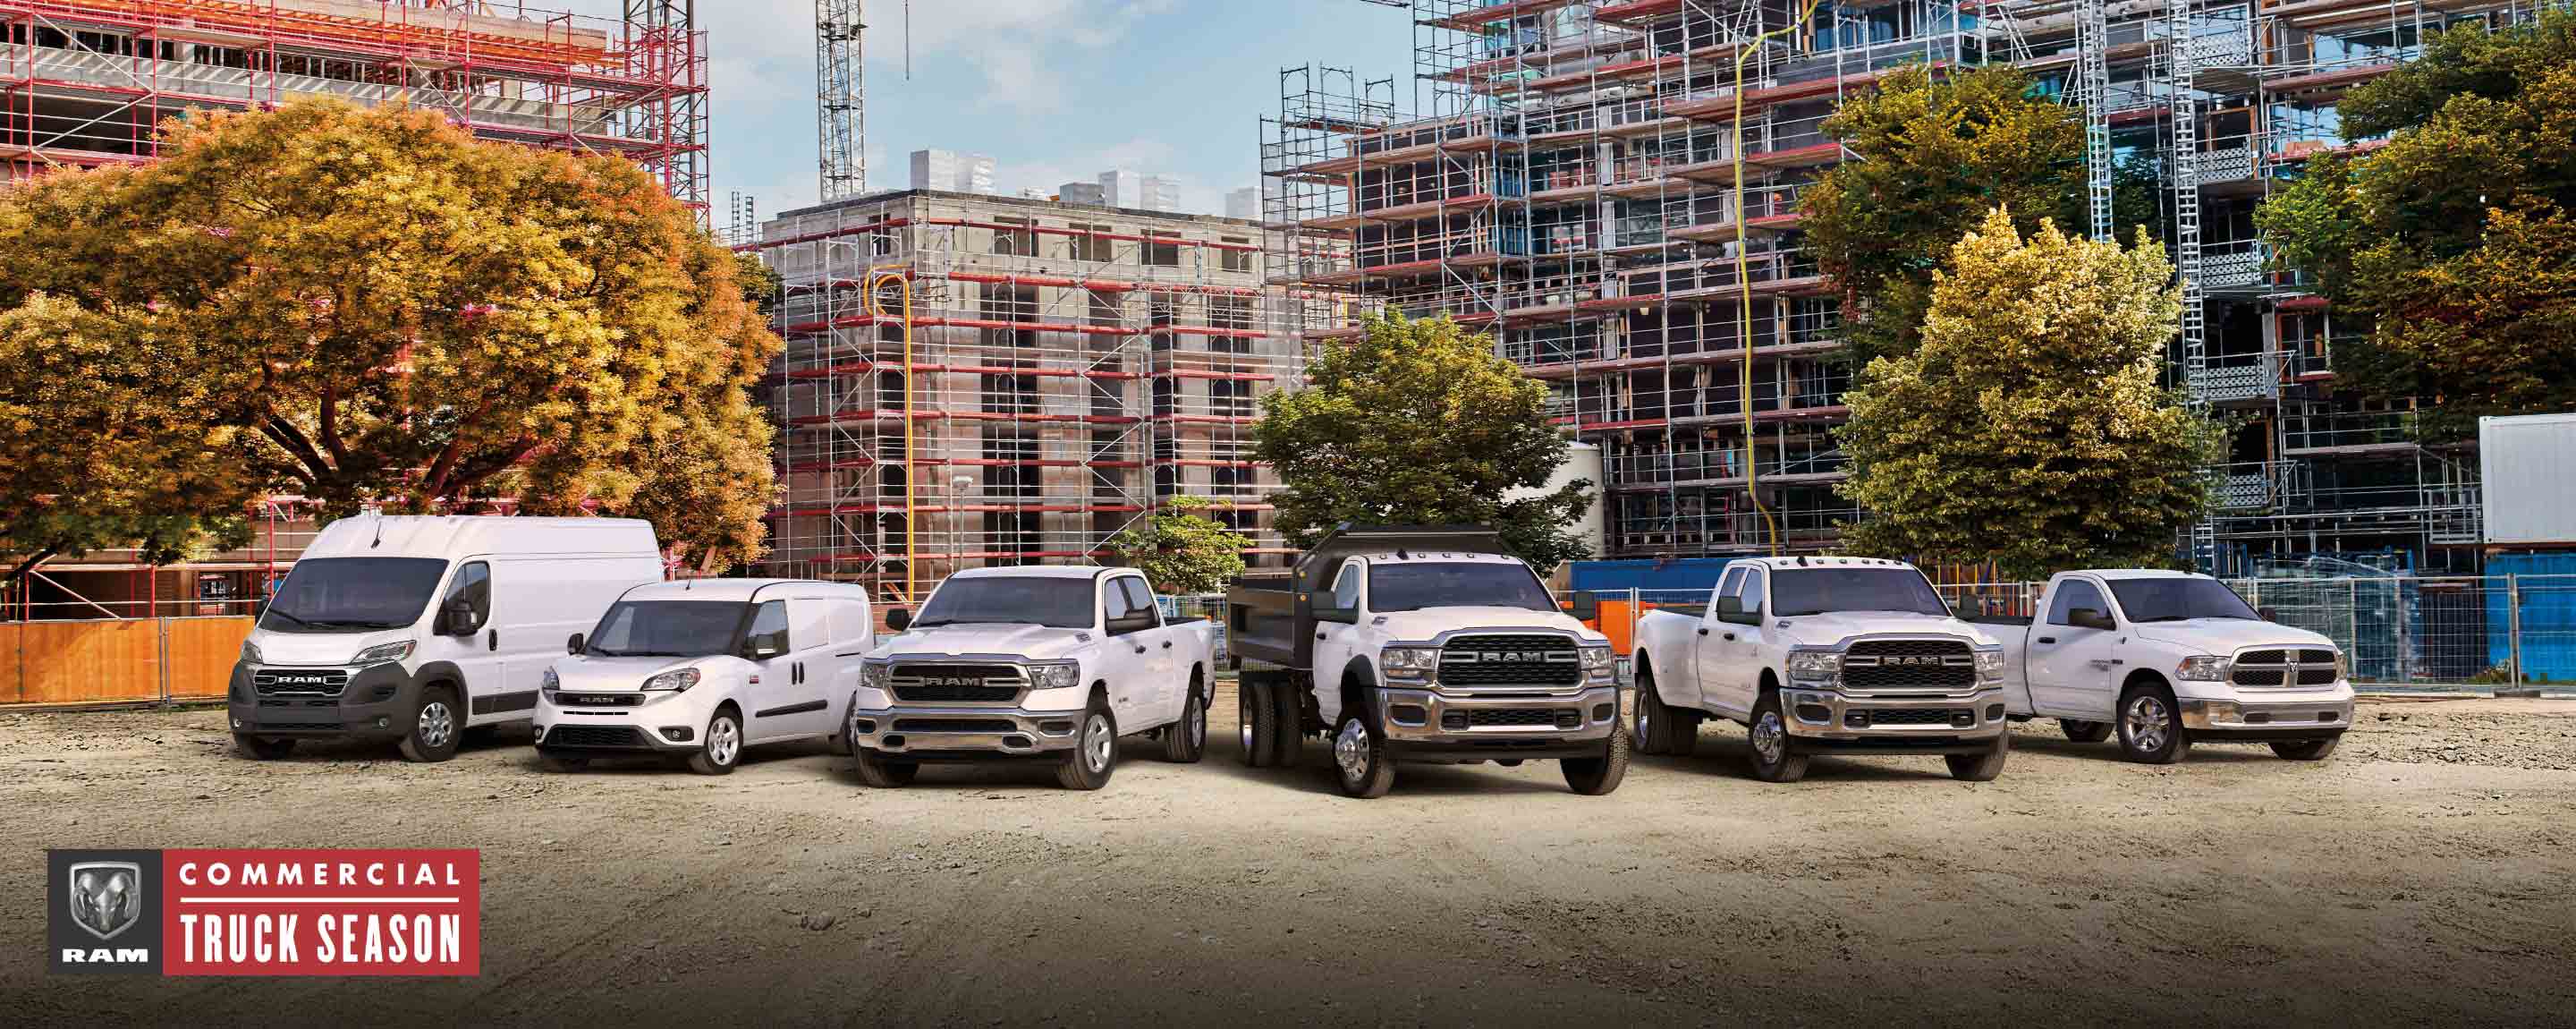 Ram Commercial Truck season. The 2023 Ram lineup parked at a massive commercial construction site. From left to right: a Ram ProMaster High Roof, Ram ProMaster City Cargo Van, Ram 1500, Ram 5500 Chassis Cab with dump body, Ram 3500 and Ram 1500 Classic.